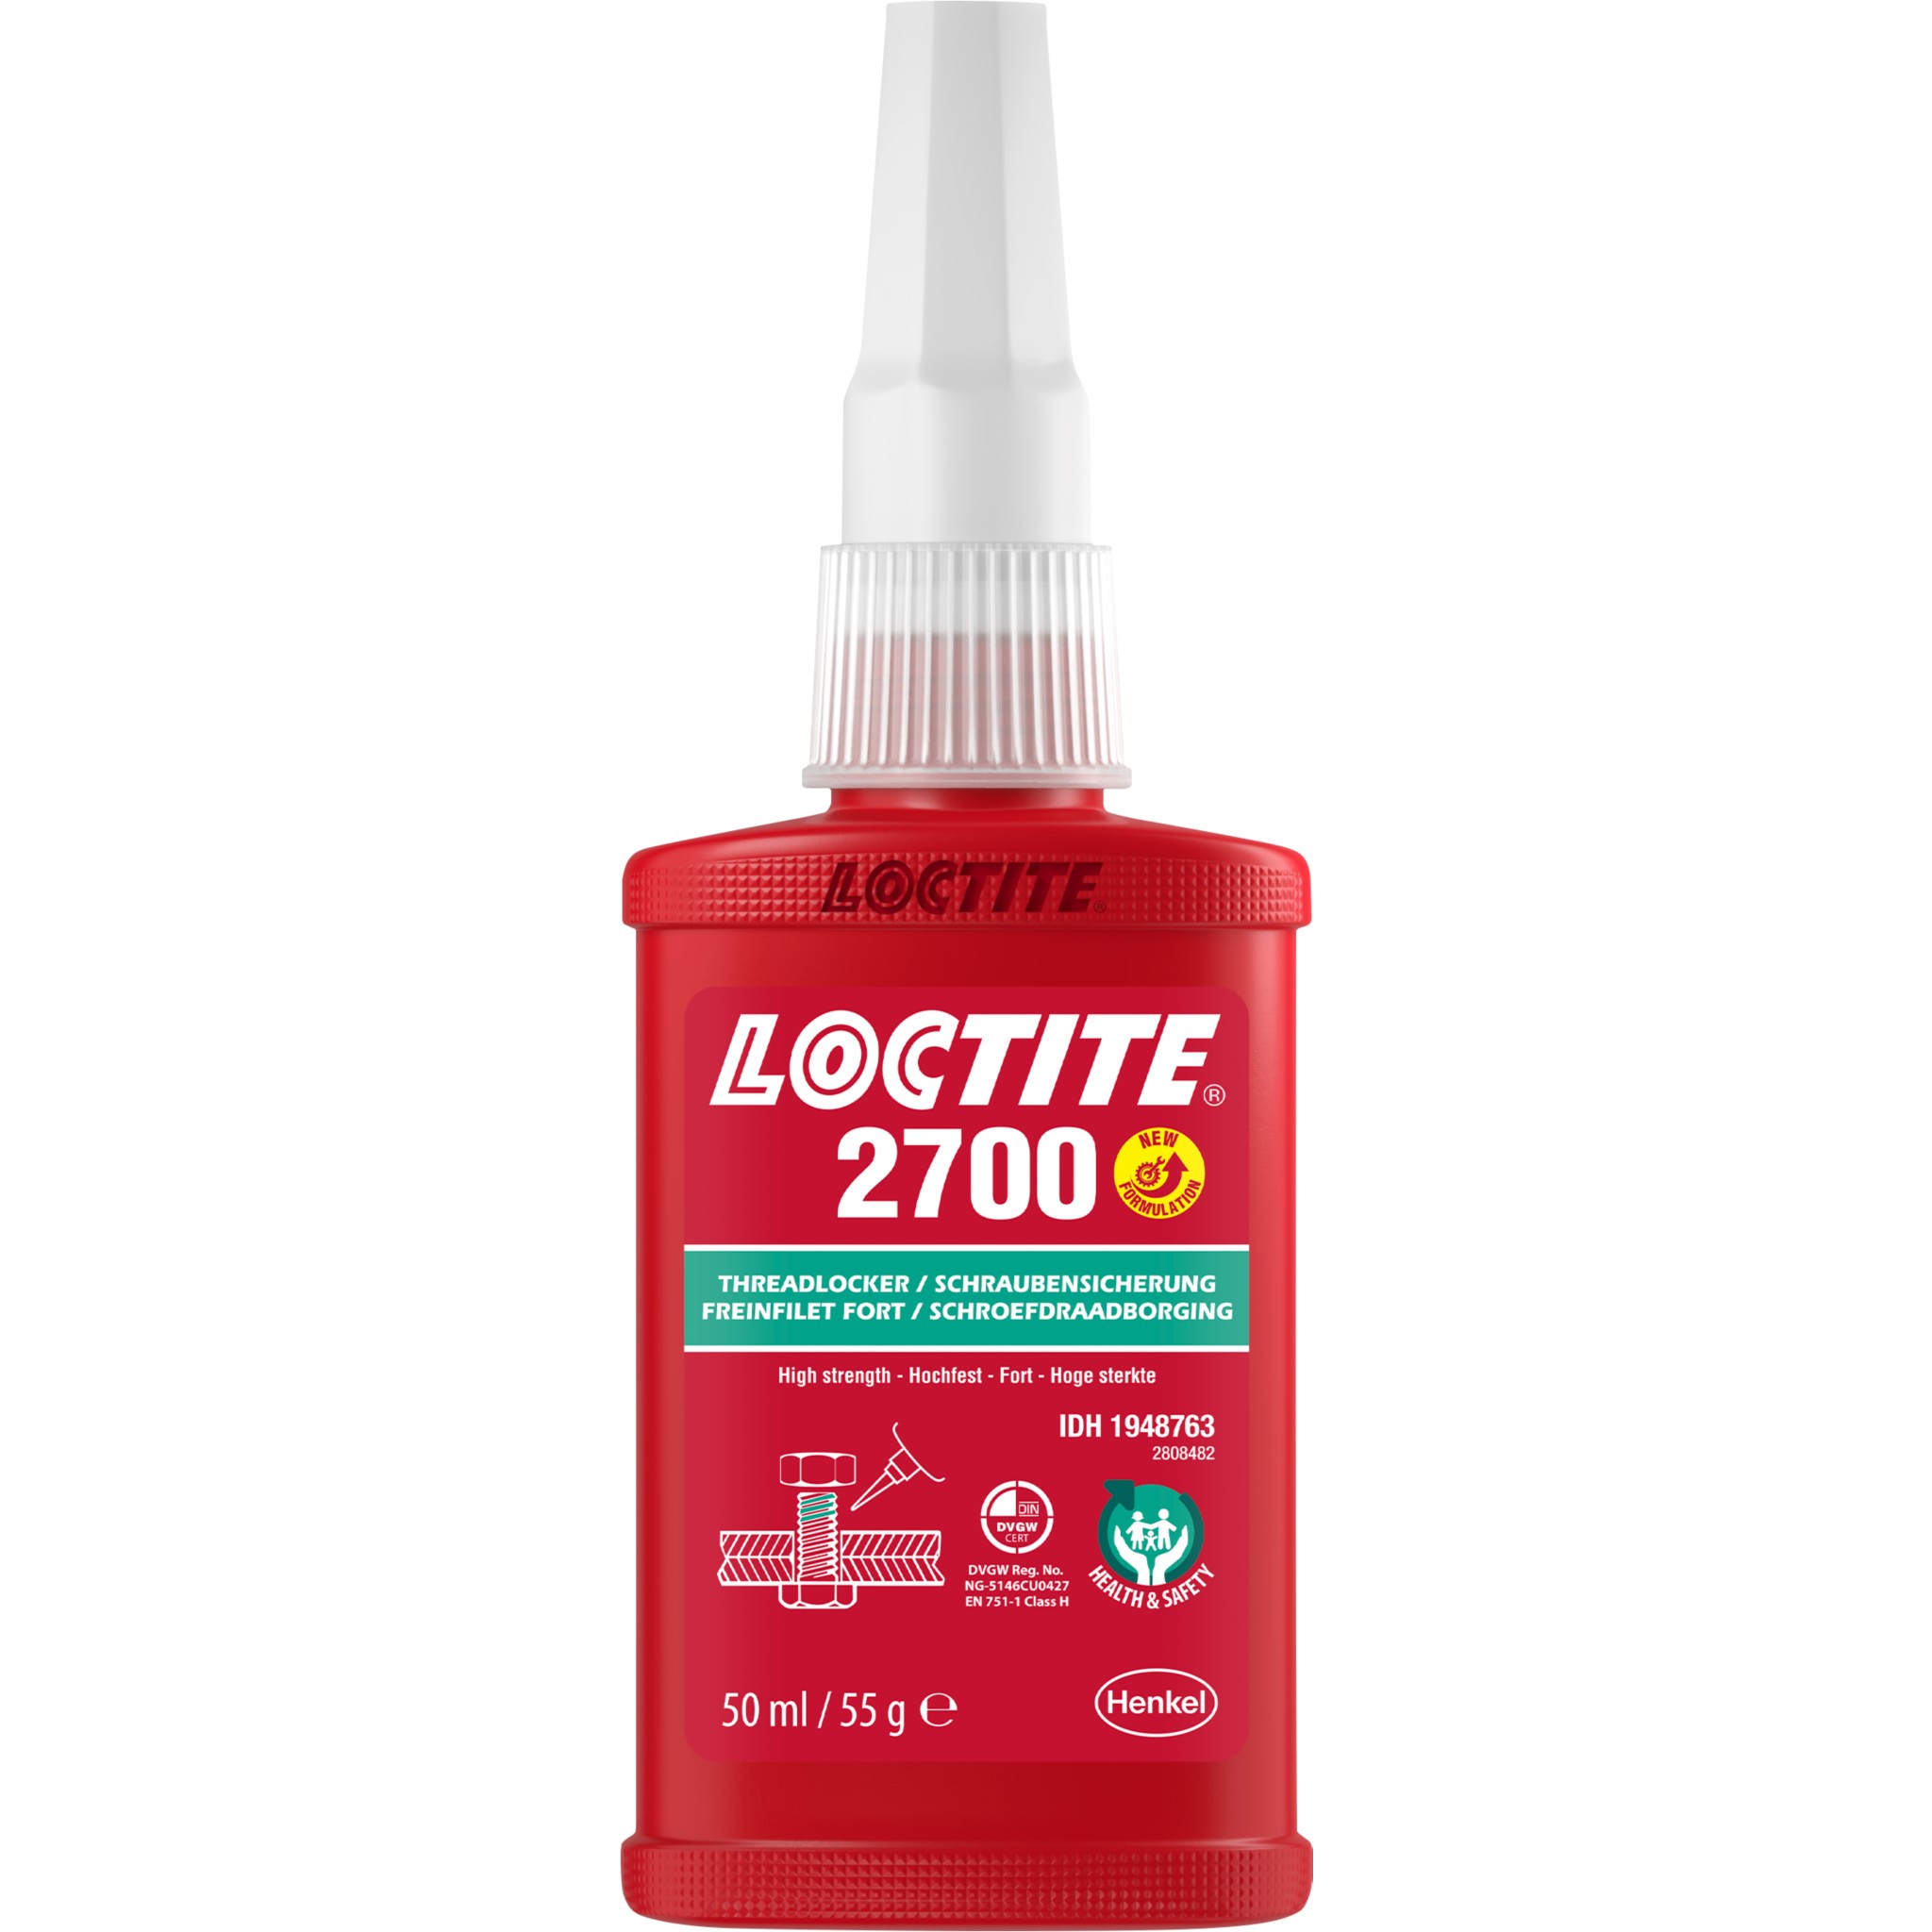 LOCTITE 243, Universal adhesive for Securing Screws, Medium-Strength thread  lock & 270, adhesive for the Permanent Securing of Screws, High-Strength